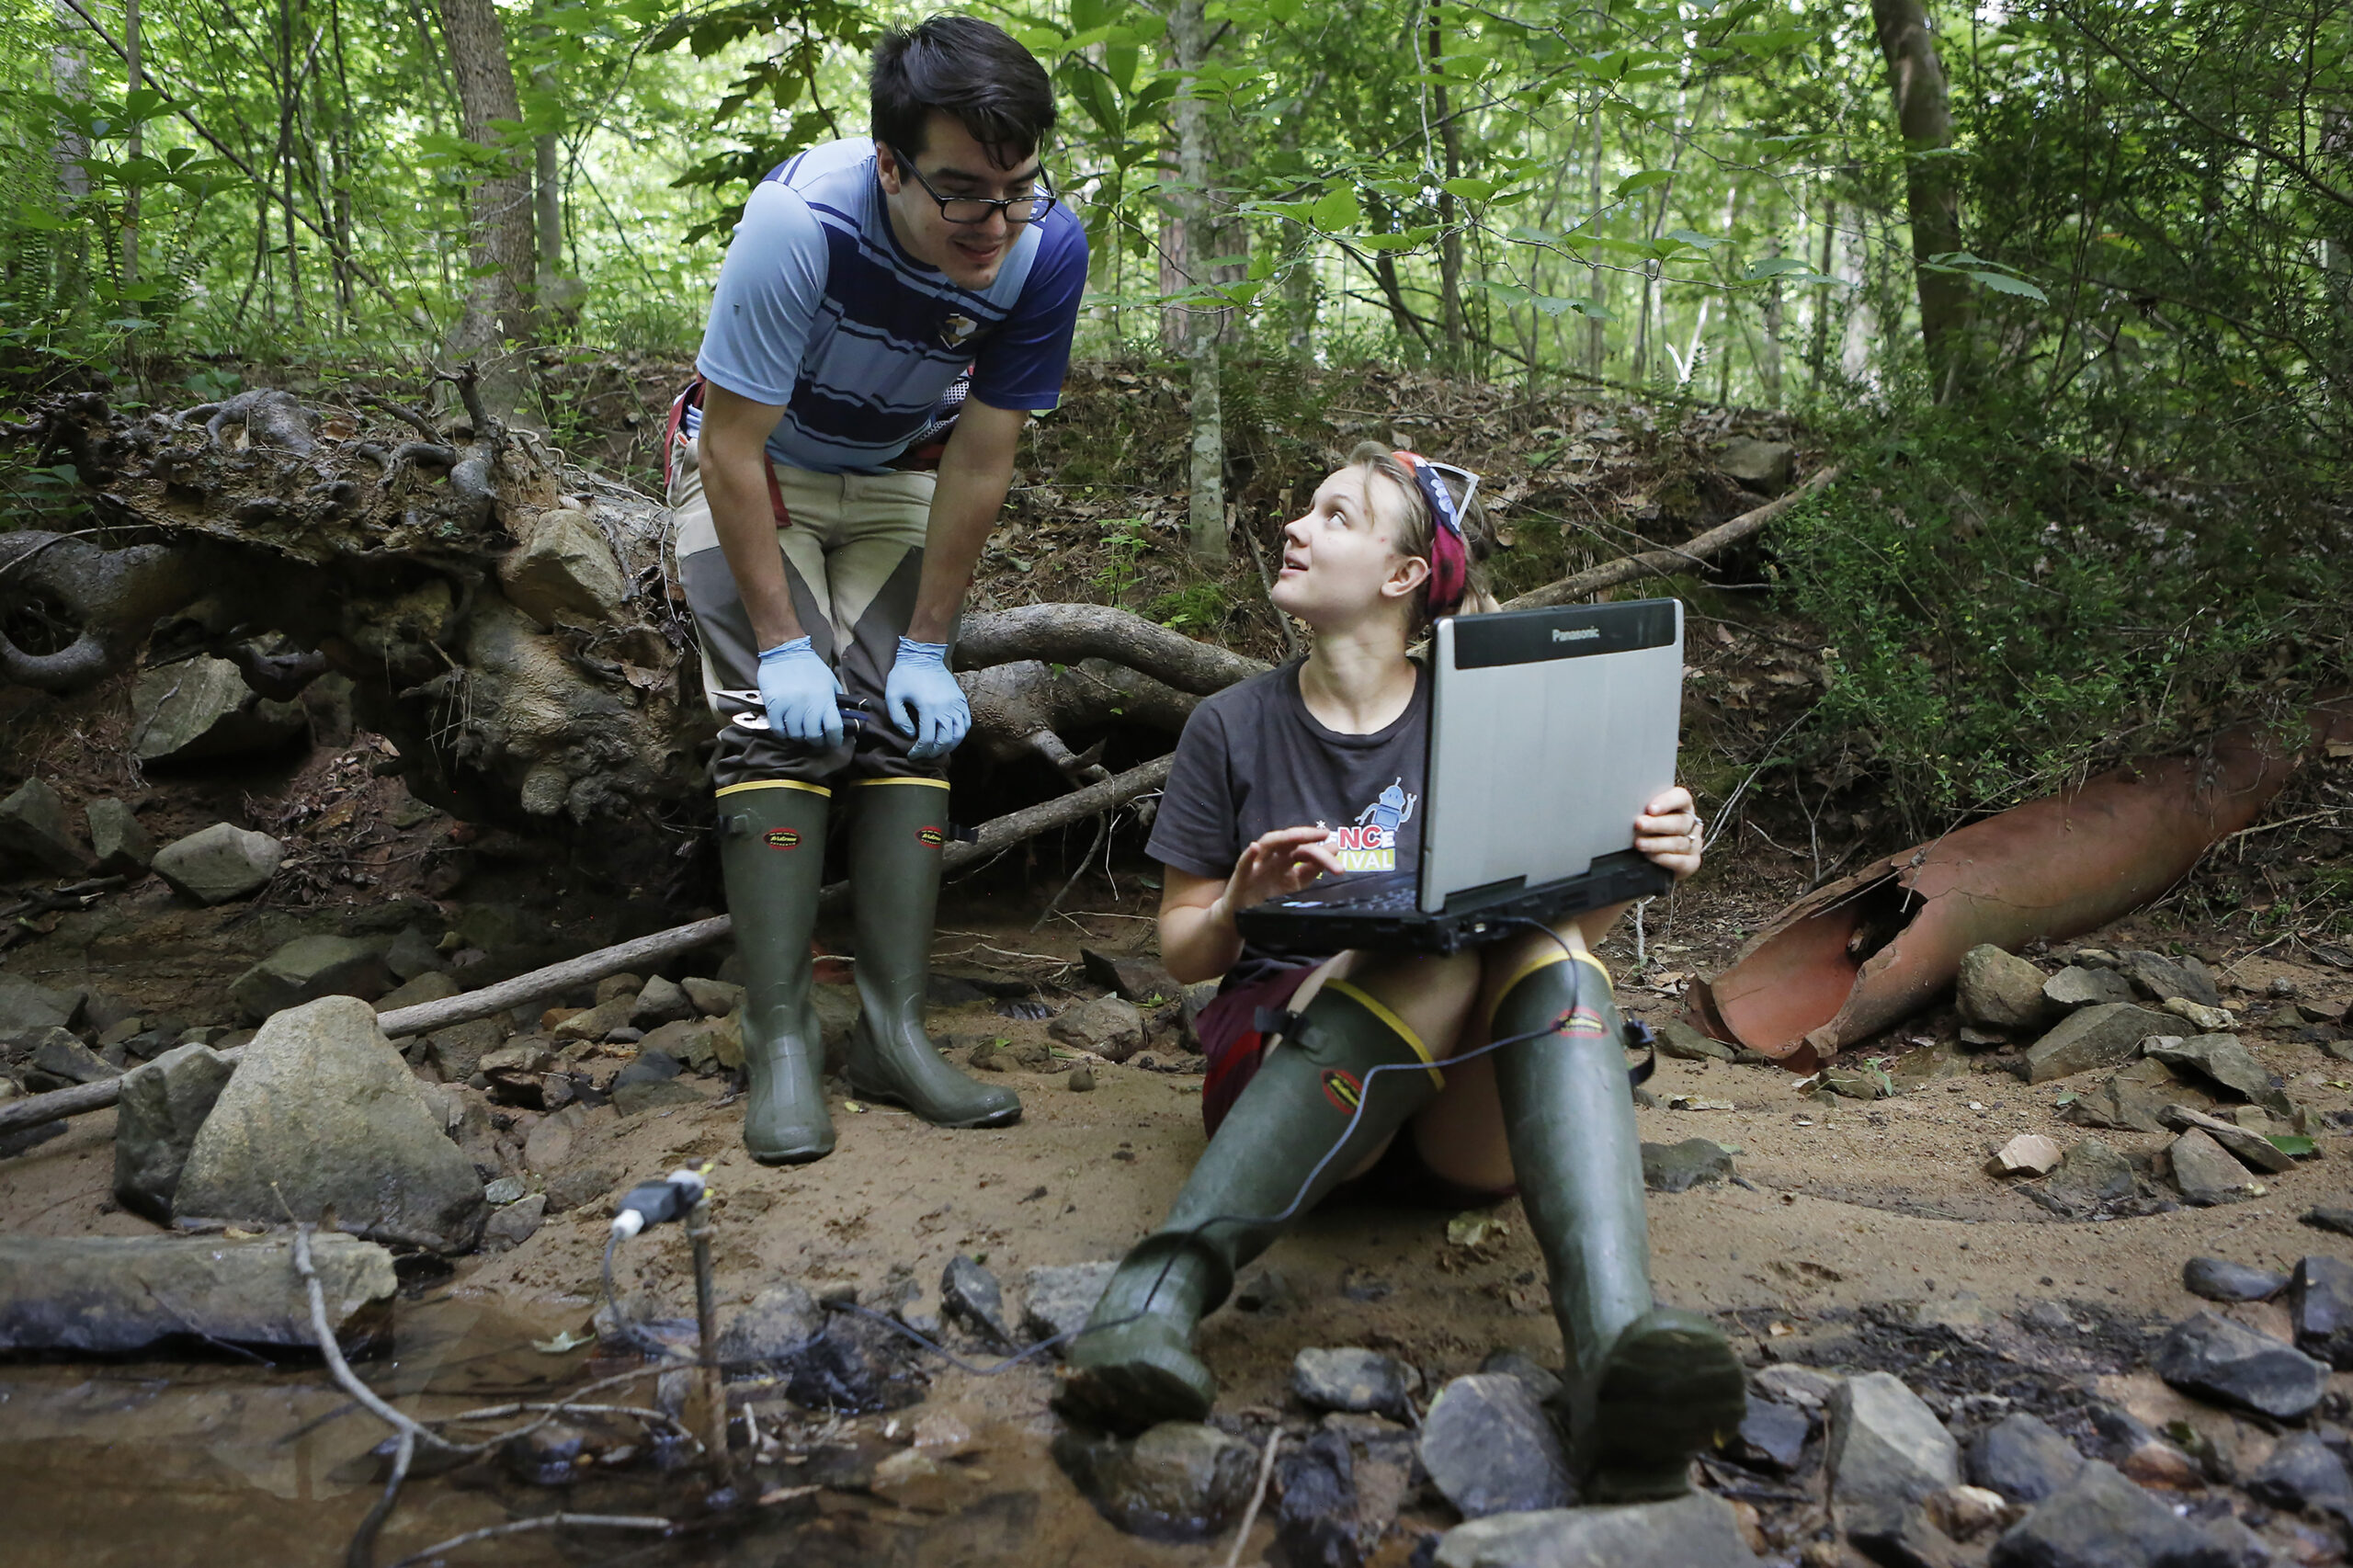 Two researchers sit next to a stream, one with a laptop in their hand, discussing their research.